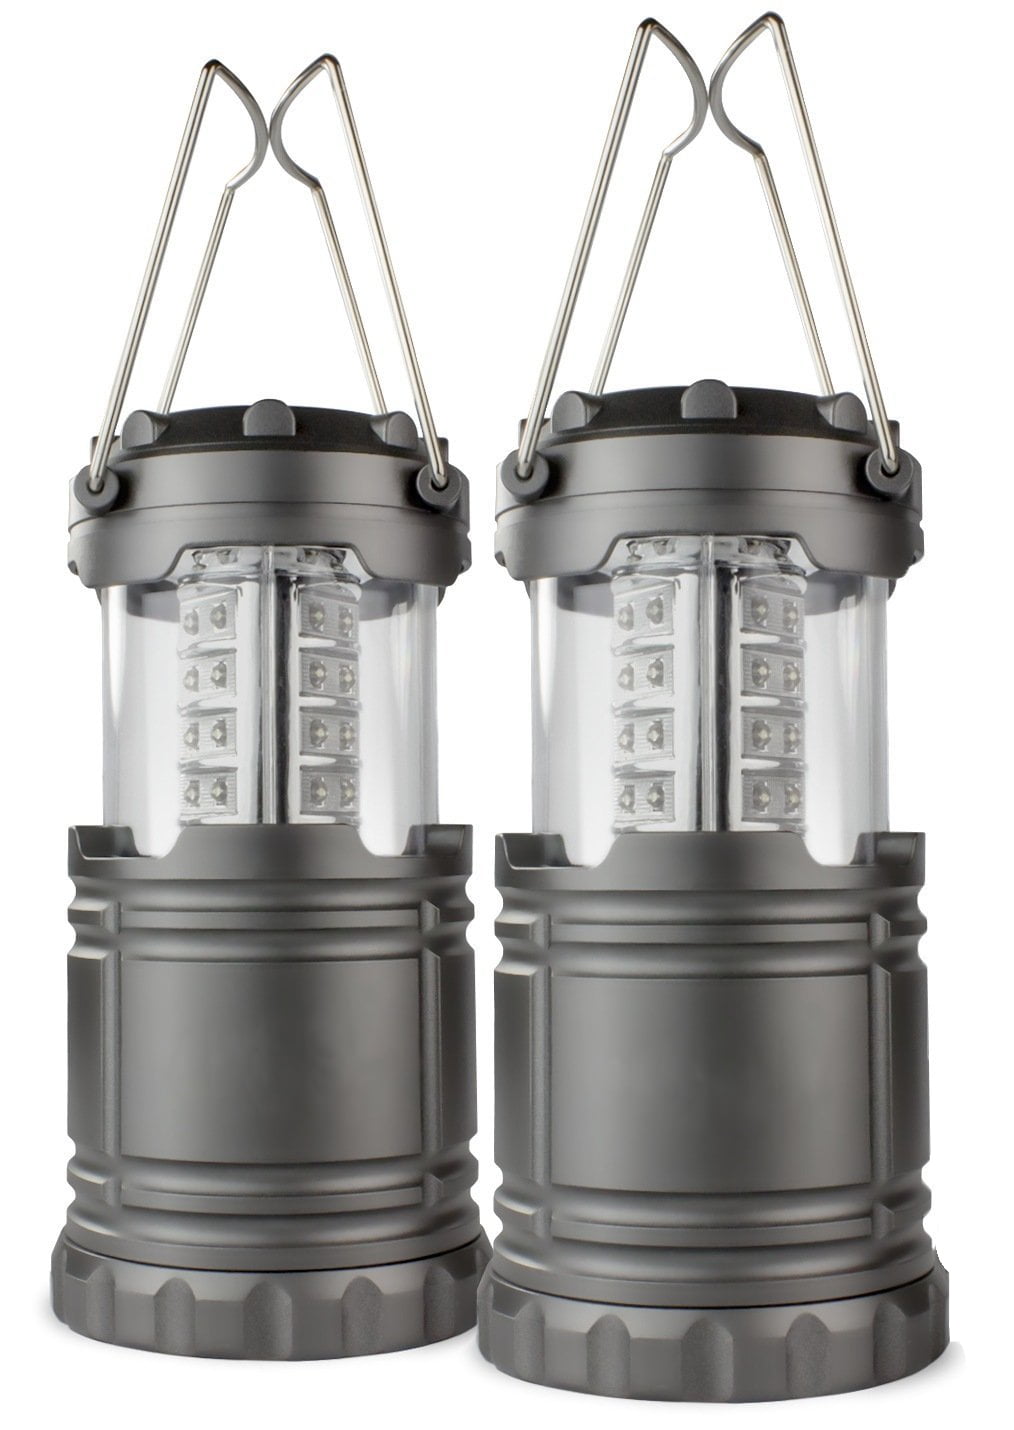 Ultra Bright 60 LED Outdoor Camping Tent Light Lantern Hiking Fishing Lamp 2Pack 